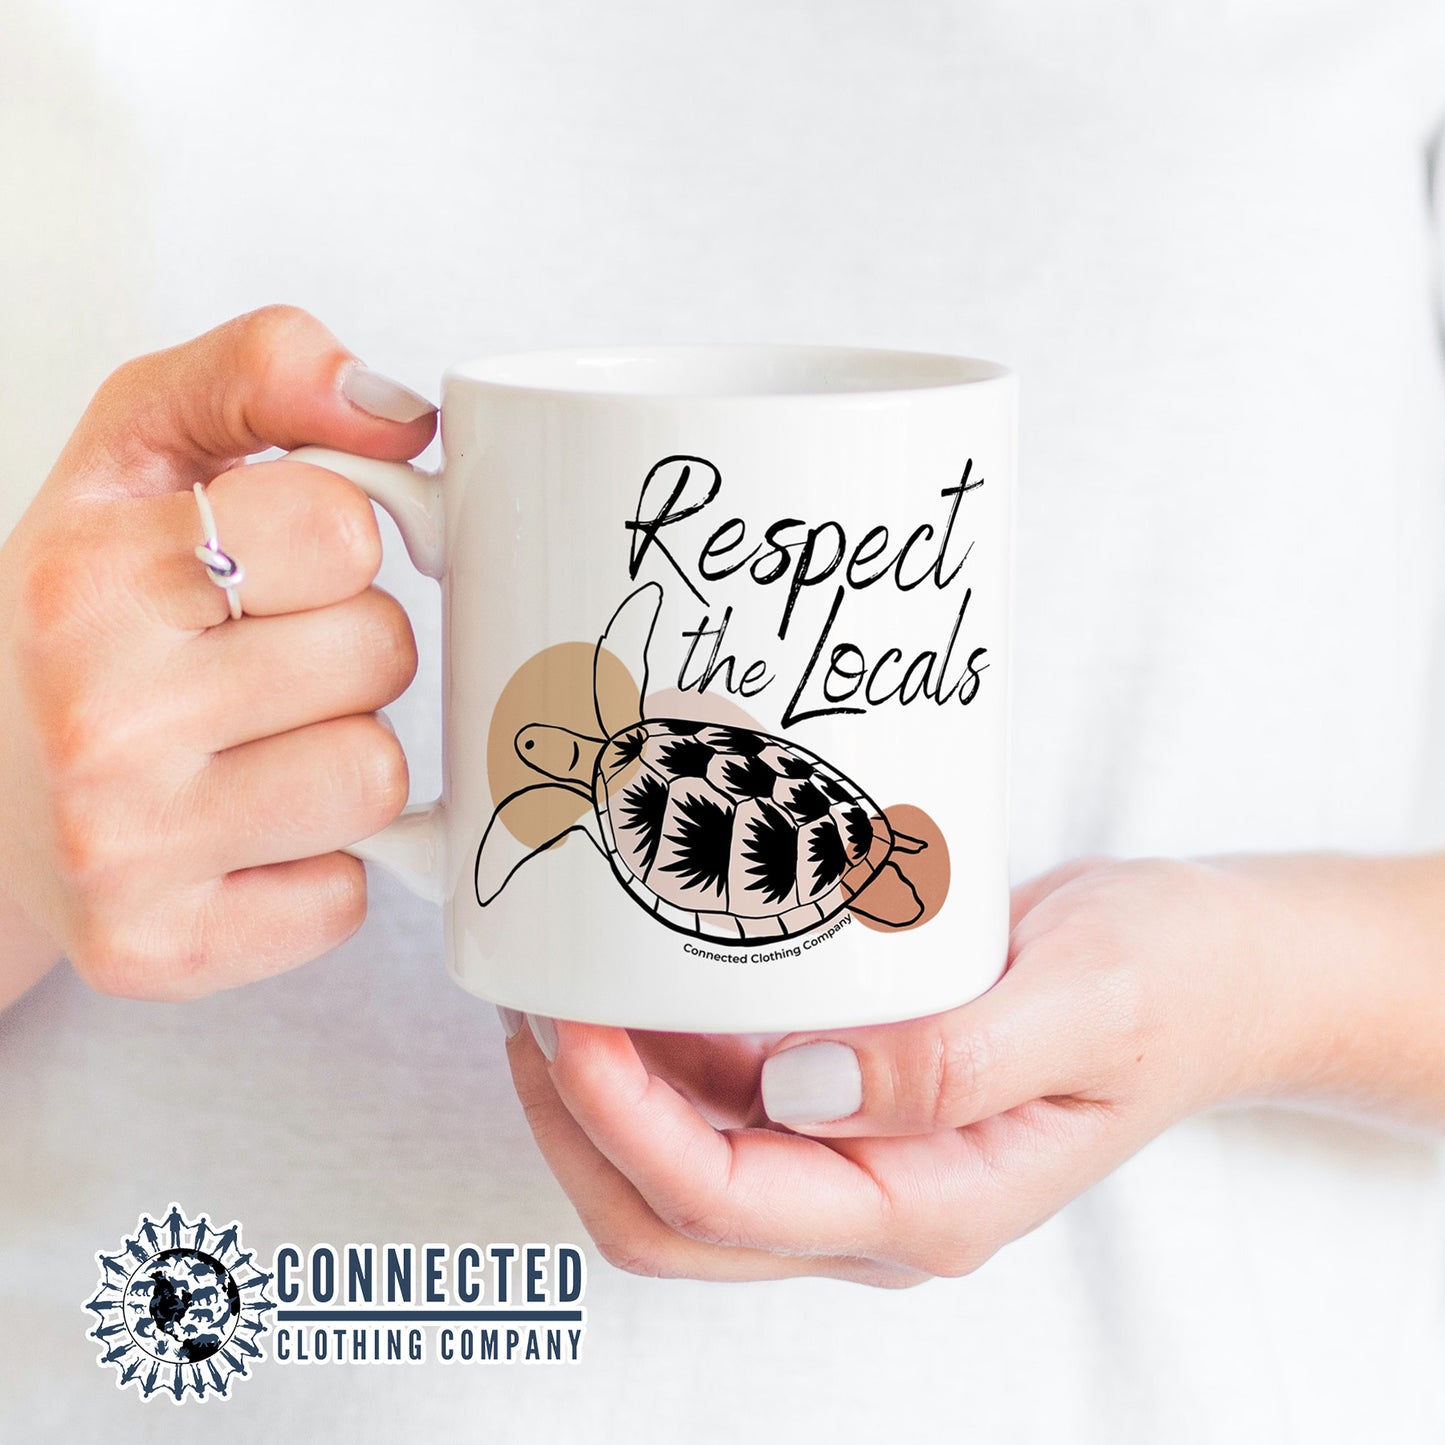 Respect The Locals Sea Turtle Mug - Connected Clothing Company - 10% donated to sea turtle conservation